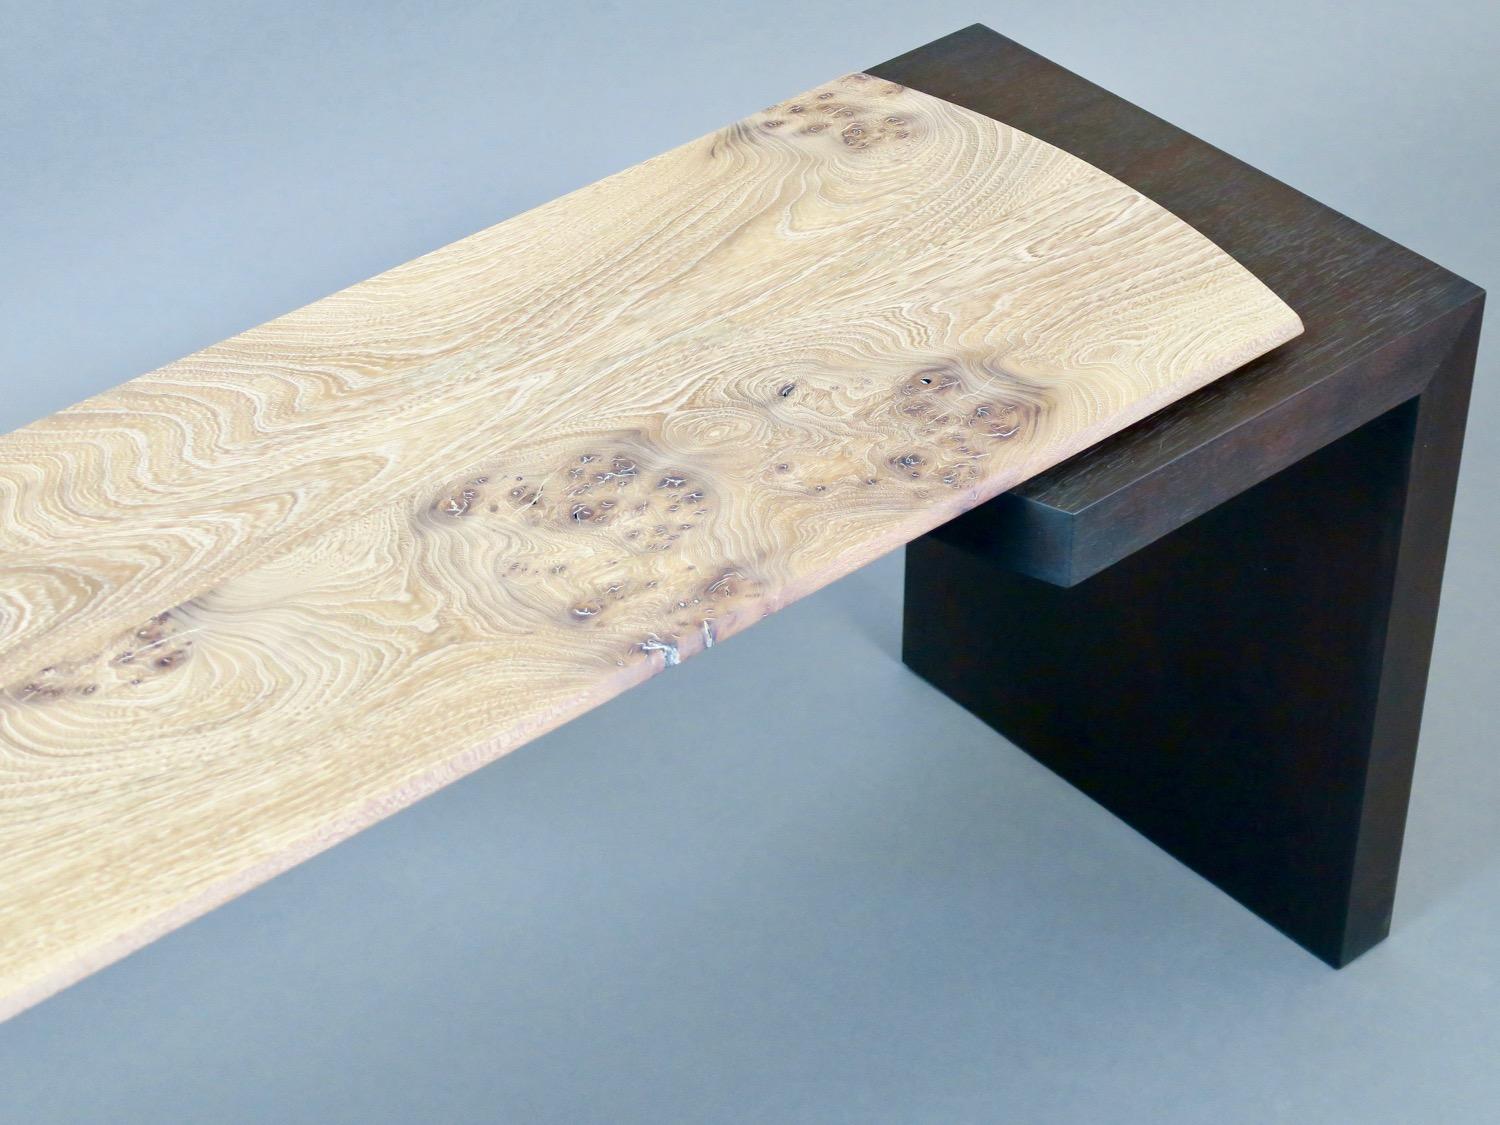 Contemporary Blackened Walnut and Figured Bubinga Bench by Thomas Throop/ Black Creek Designs For Sale